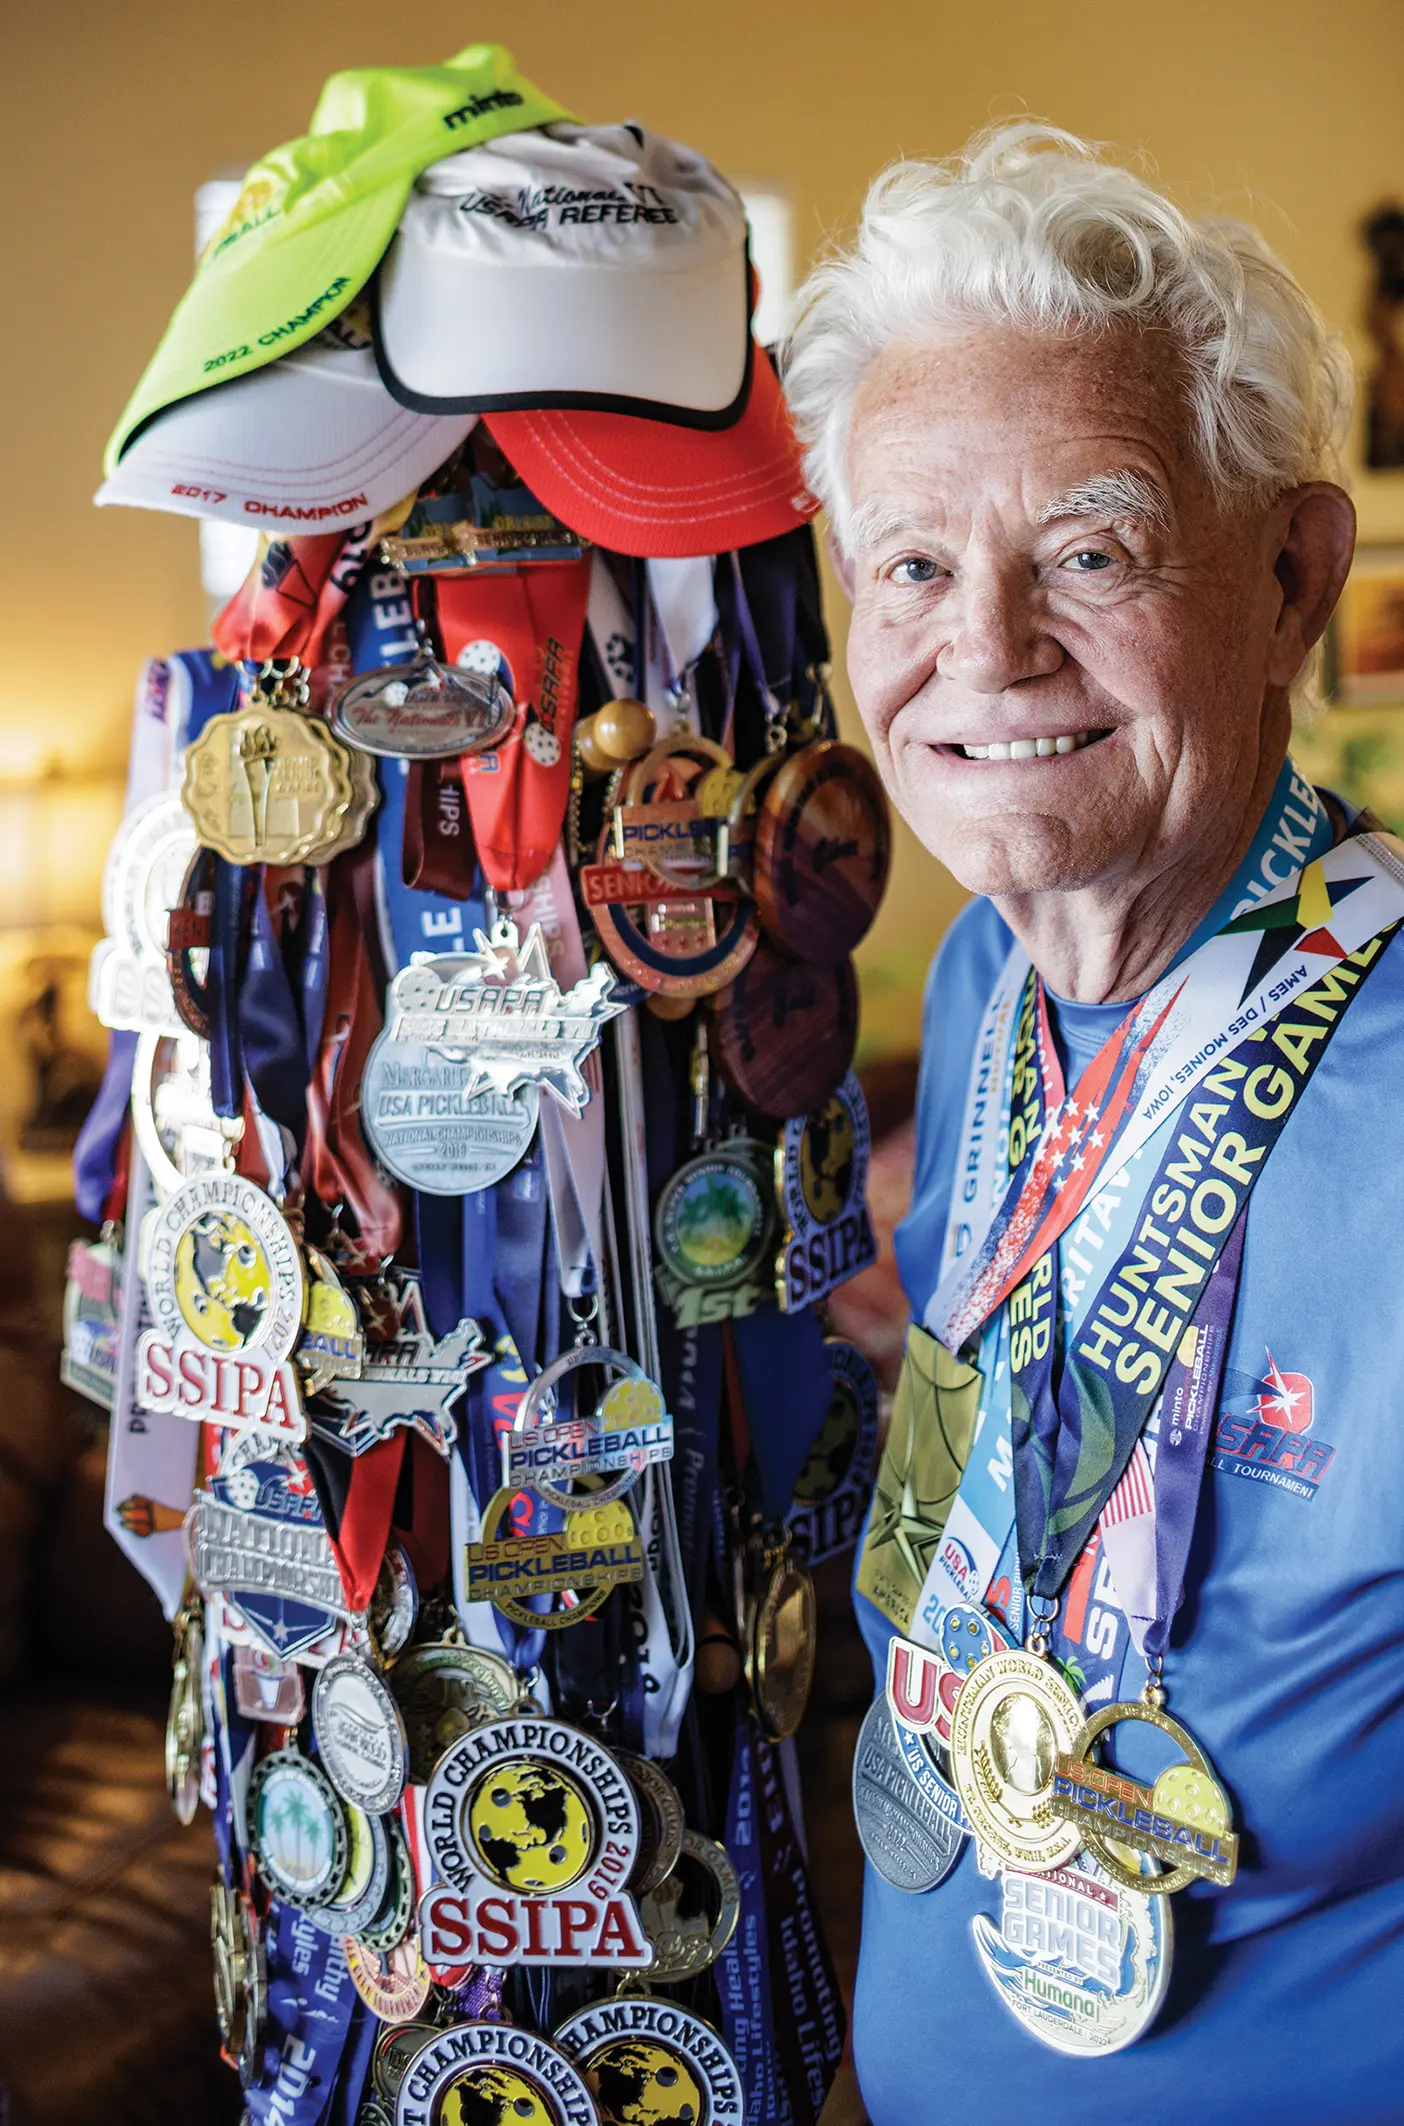 Johnson, grinning, shows off his more than 250 medals, most of them gold.